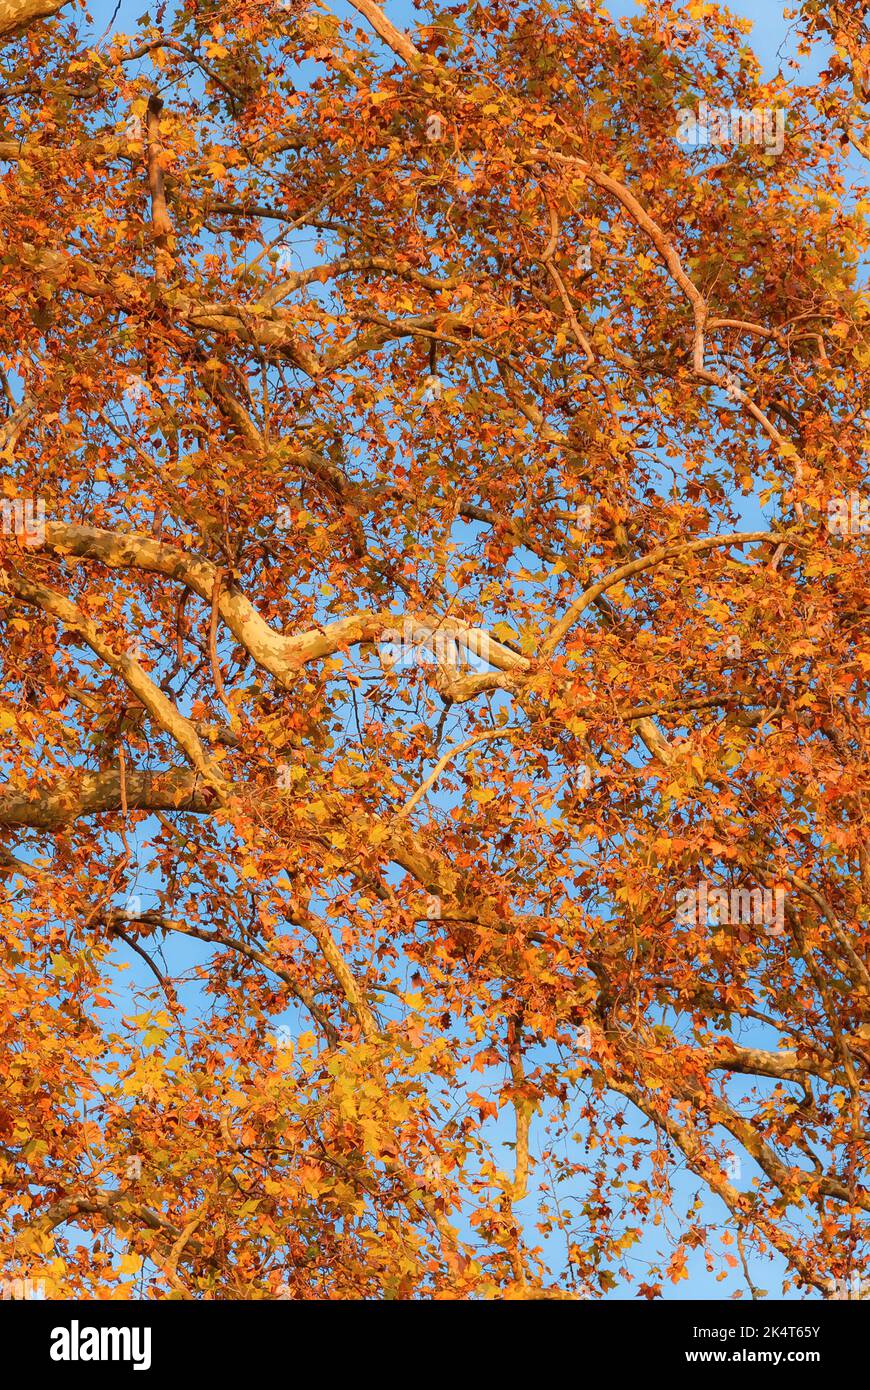 Autumnal and foliage background. Autumn arrives, sycamore leaves turn from green to yellow and brown Stock Photo